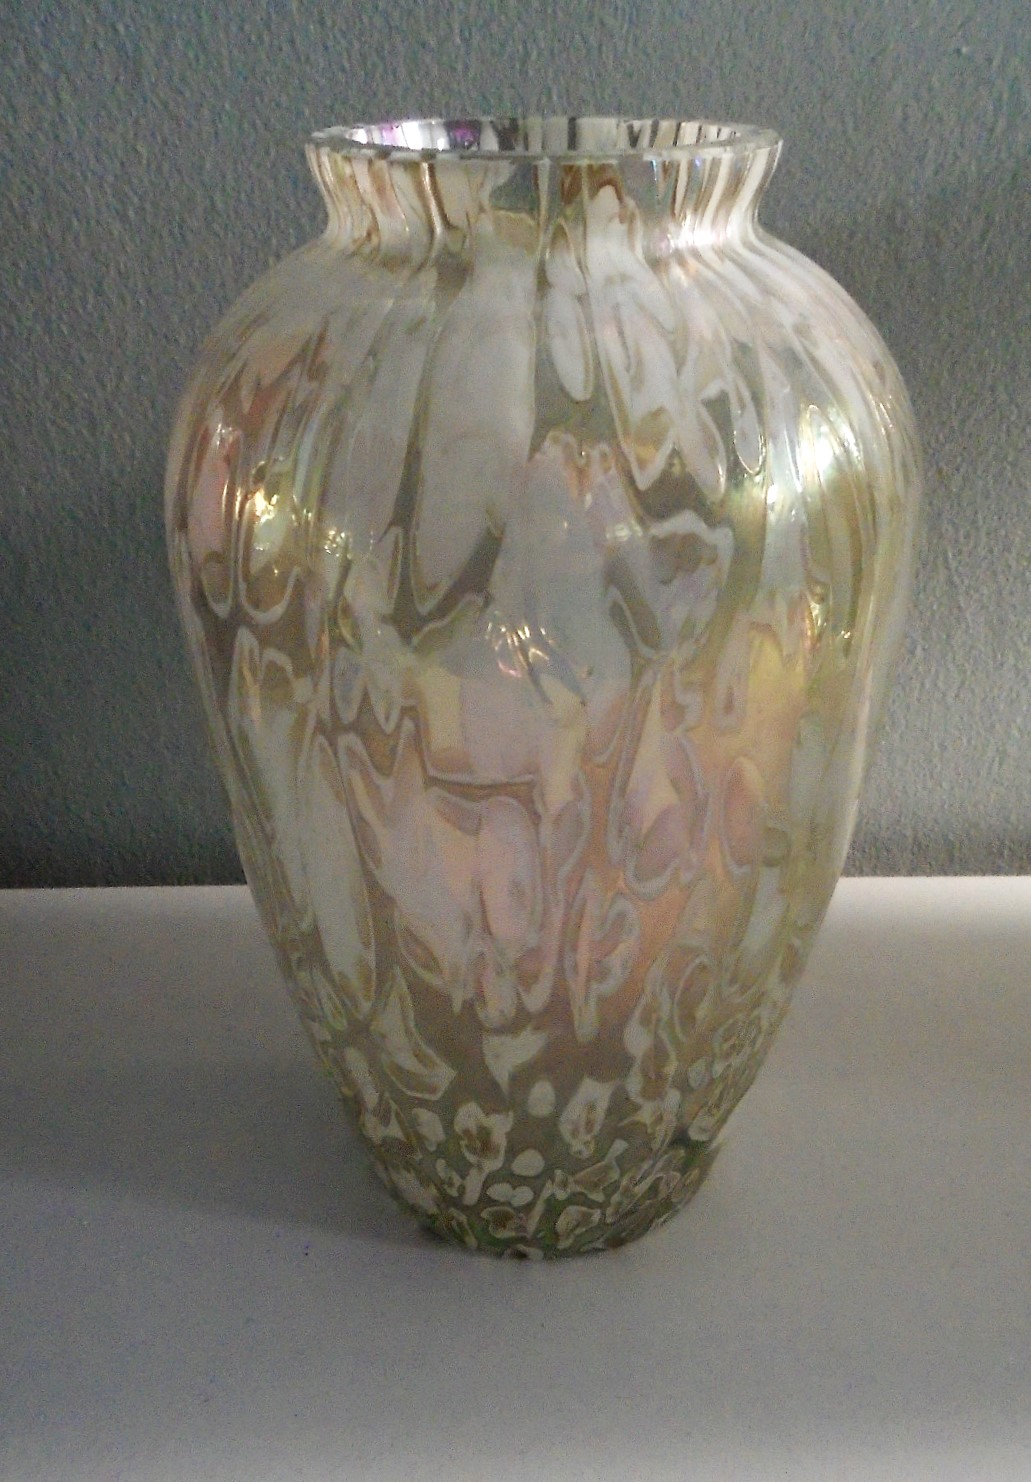 Beautiful example of a Royal Brierley Glass Lustre Baluster Vase from the iconic Studio Range. 